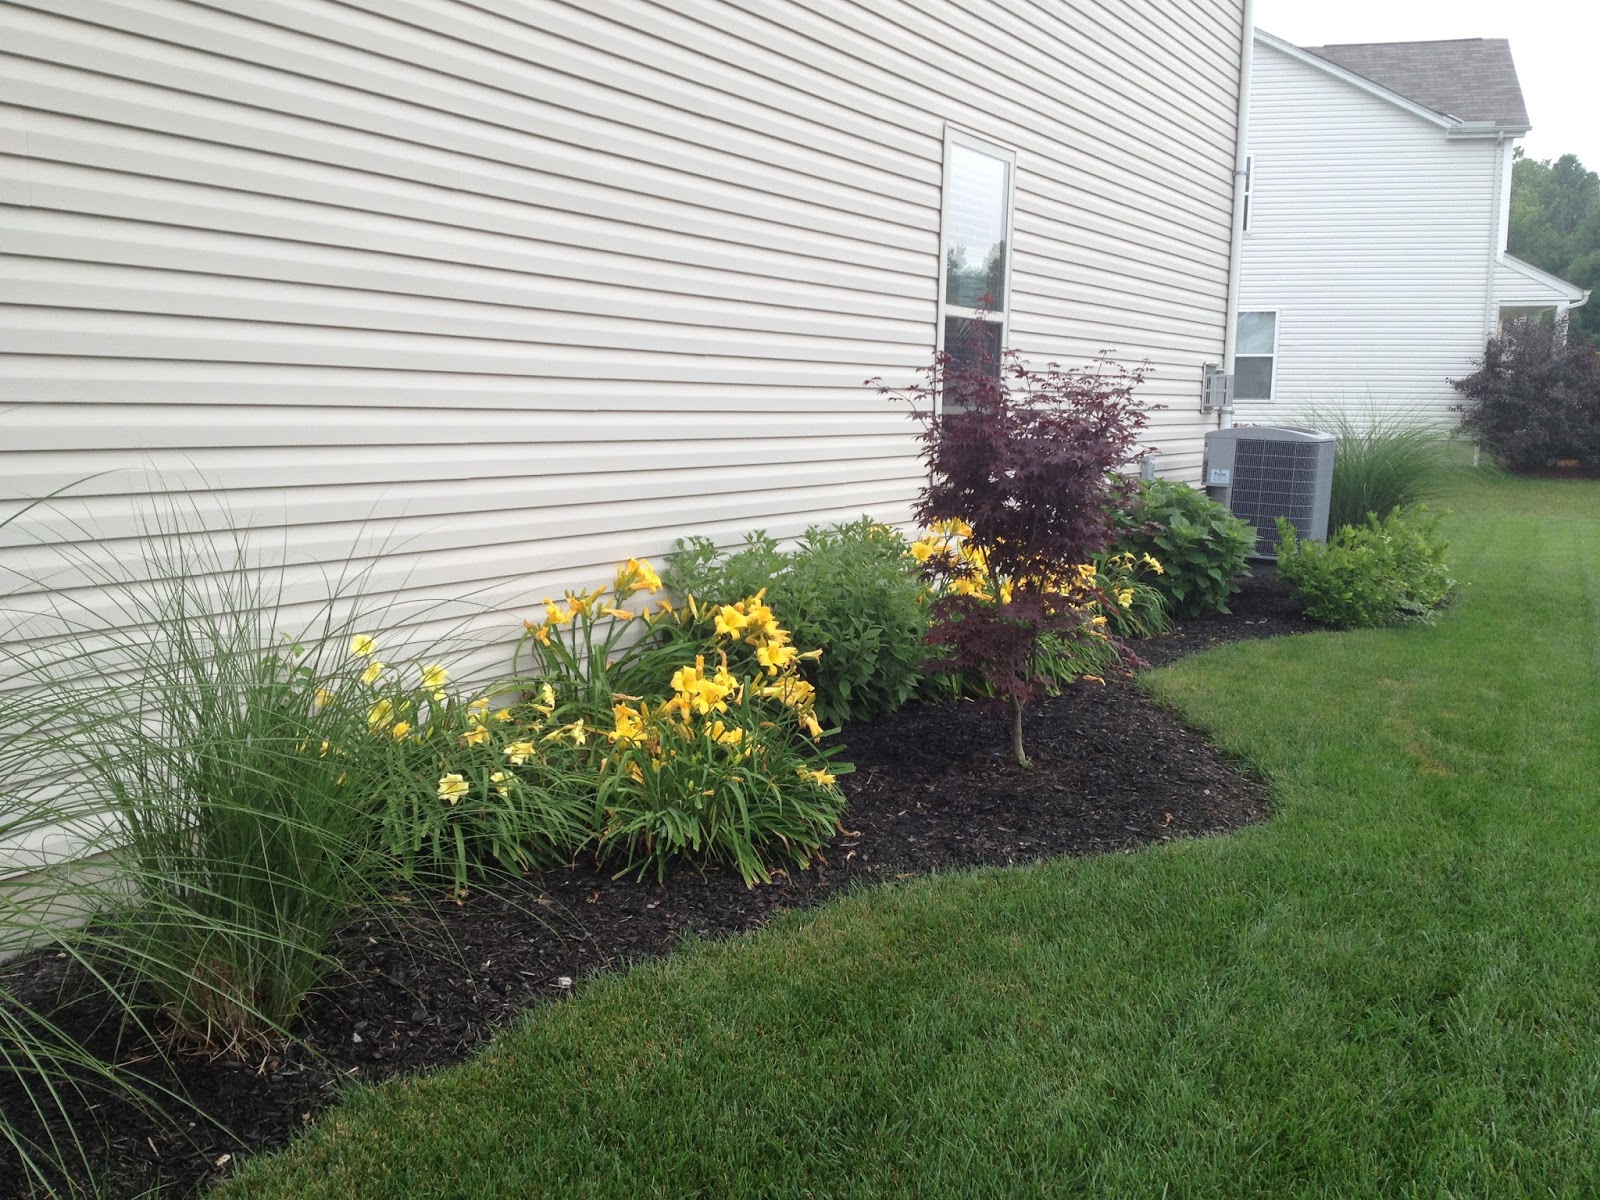 MY LIFE BY DESIGN: landscaping update: The side yard....